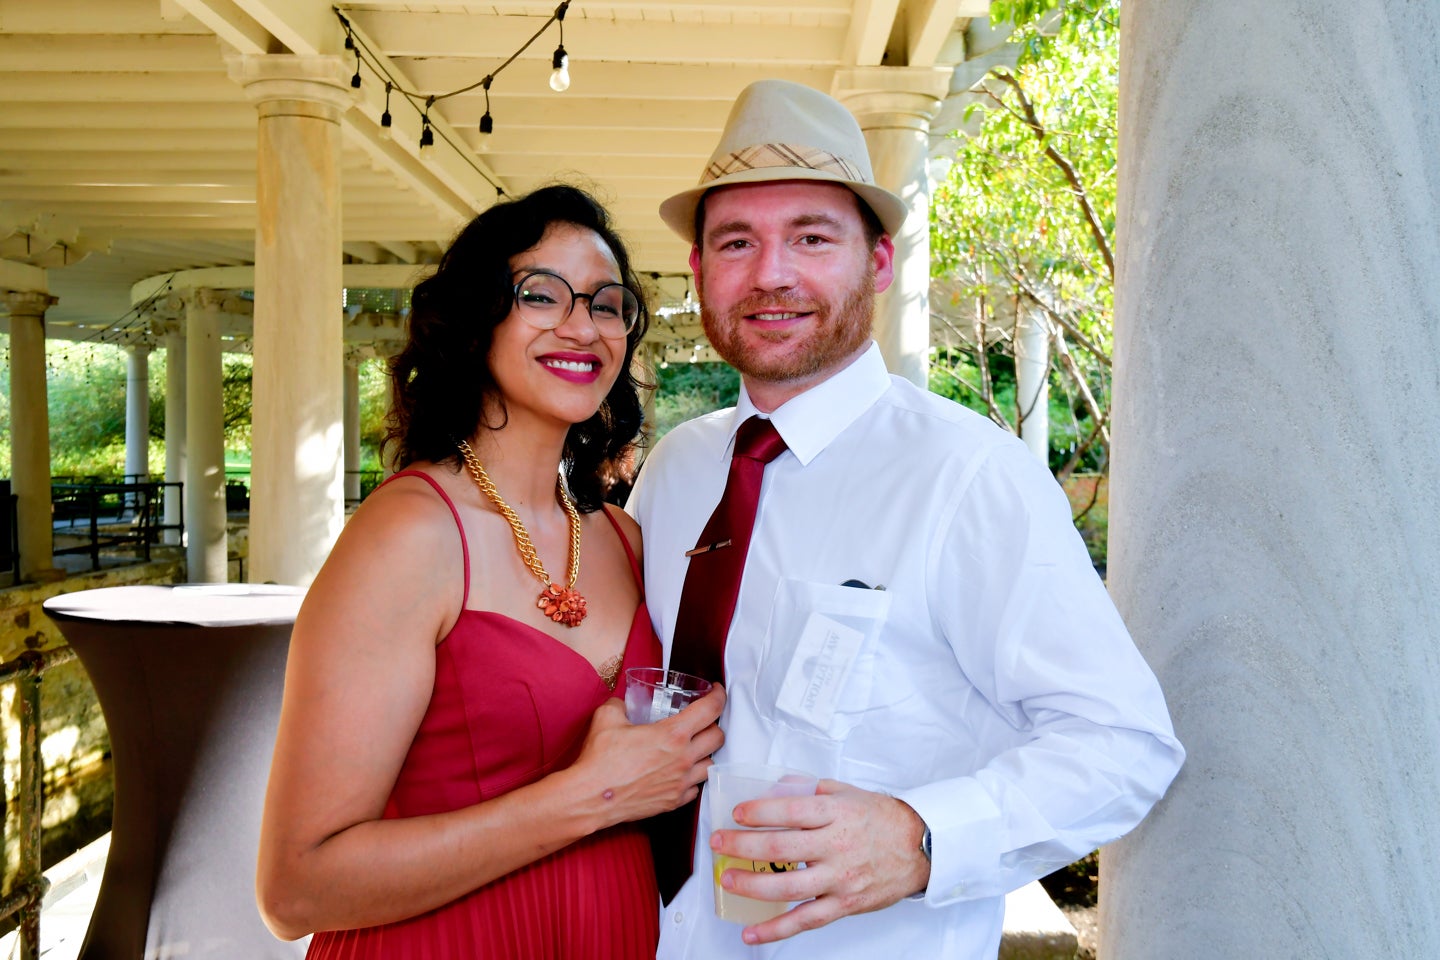 Snapped: Mingle at the Springhouse — Aug. 25, 2022